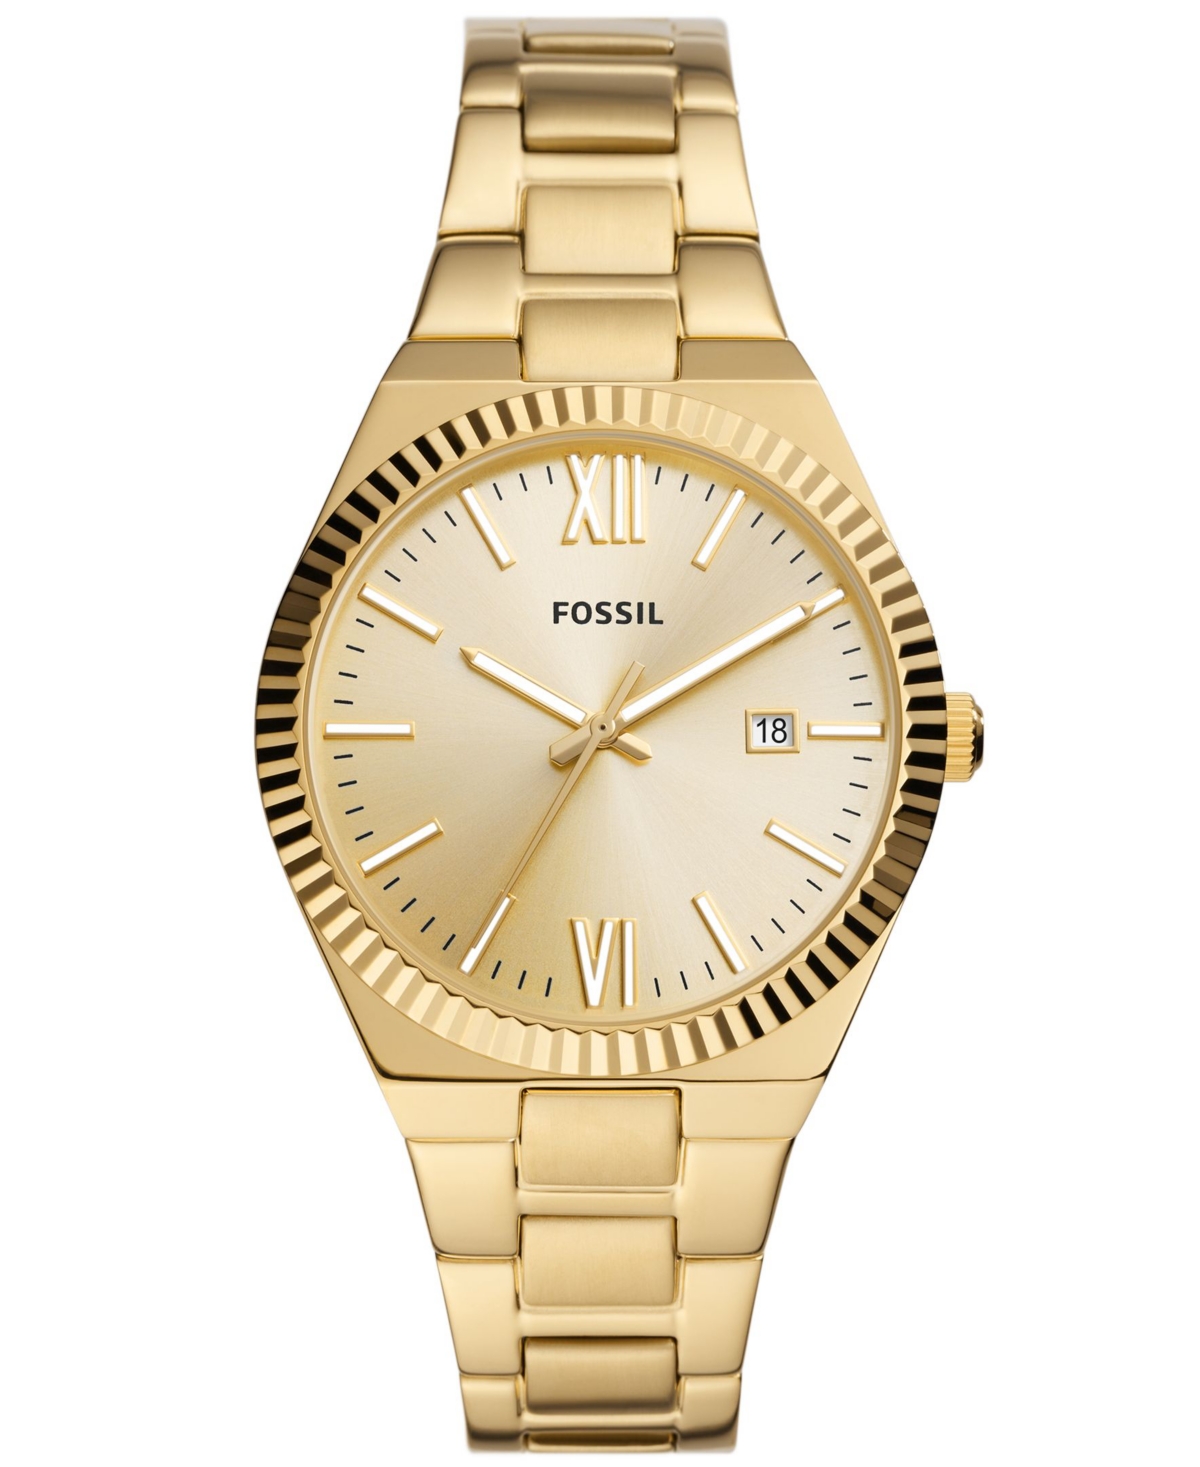 Fossil Women's Scarlette Three-hand Date Gold-tone Stainless Steel Watch, 38mm